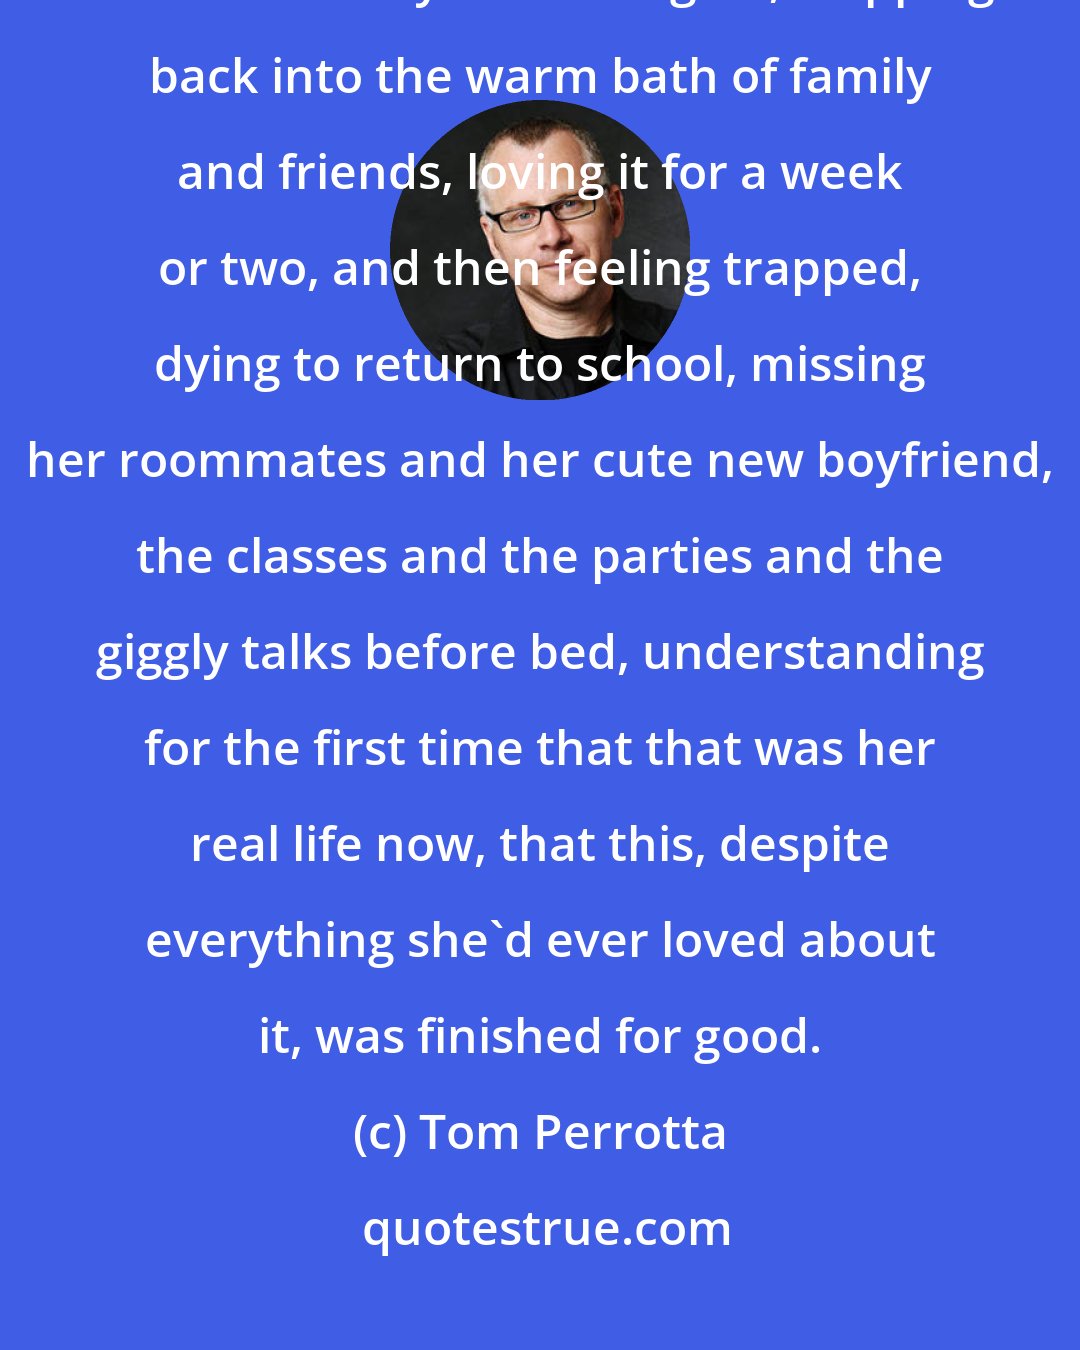 Tom Perrotta: She told her therapist it reminded her of coming home the summer after her freshman year at Rutgers, stepping back into the warm bath of family and friends, loving it for a week or two, and then feeling trapped, dying to return to school, missing her roommates and her cute new boyfriend, the classes and the parties and the giggly talks before bed, understanding for the first time that that was her real life now, that this, despite everything she'd ever loved about it, was finished for good.